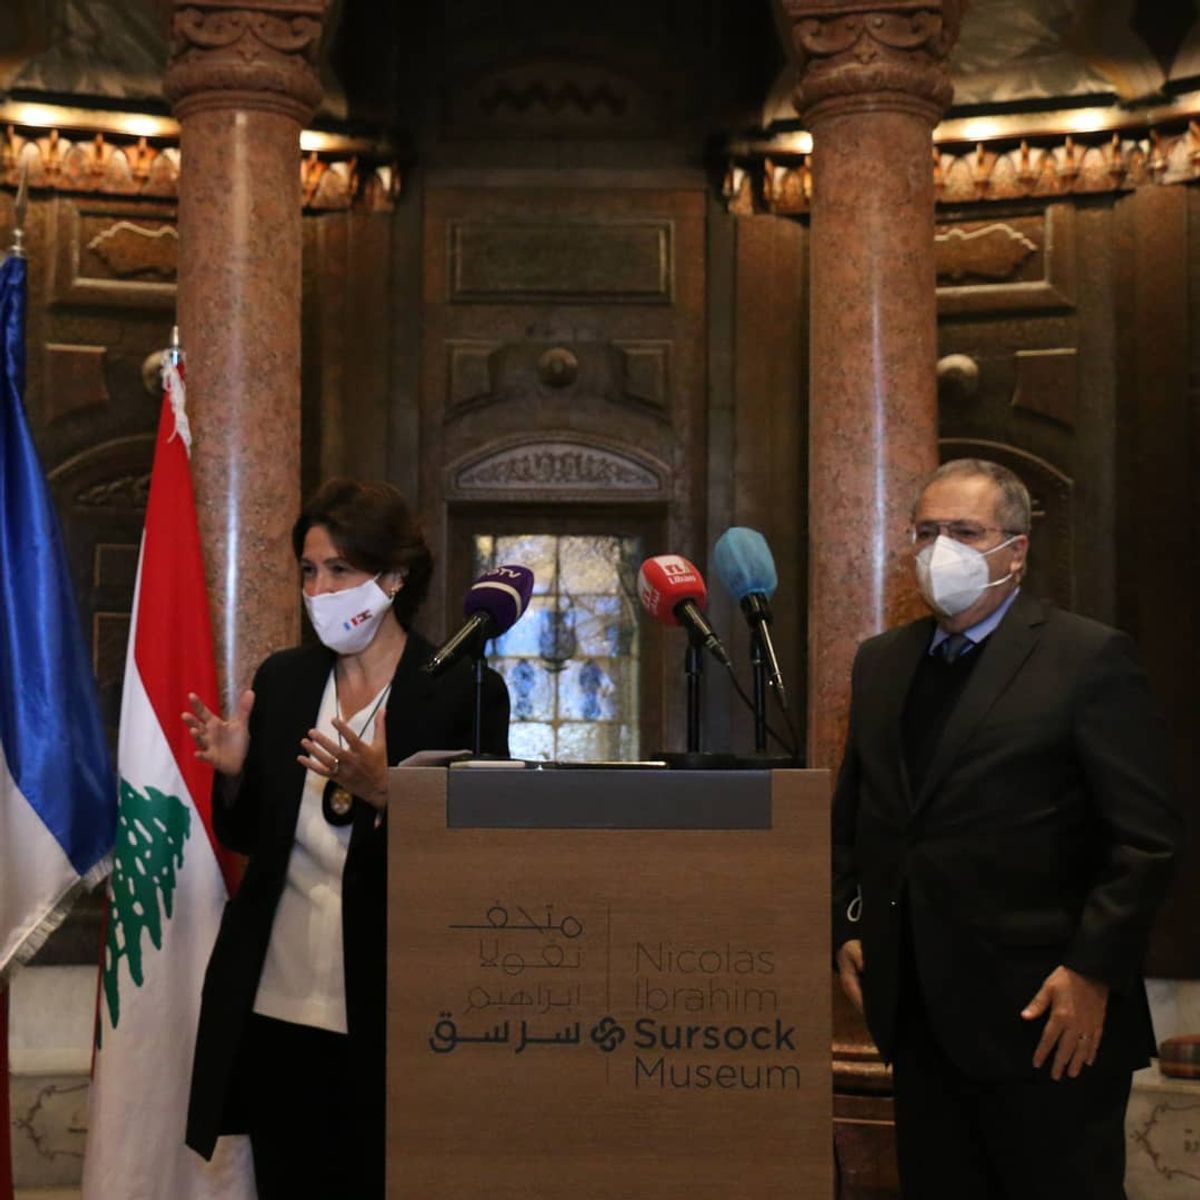 France's ambassador to Lebanon, Anne Grillo (left), has announced a grant of €500,000 from the French culture ministry to support the Sursock Museum's recovery after the Beirut explosion on 4 August 2020 Photo: Rowina Bou-Harb